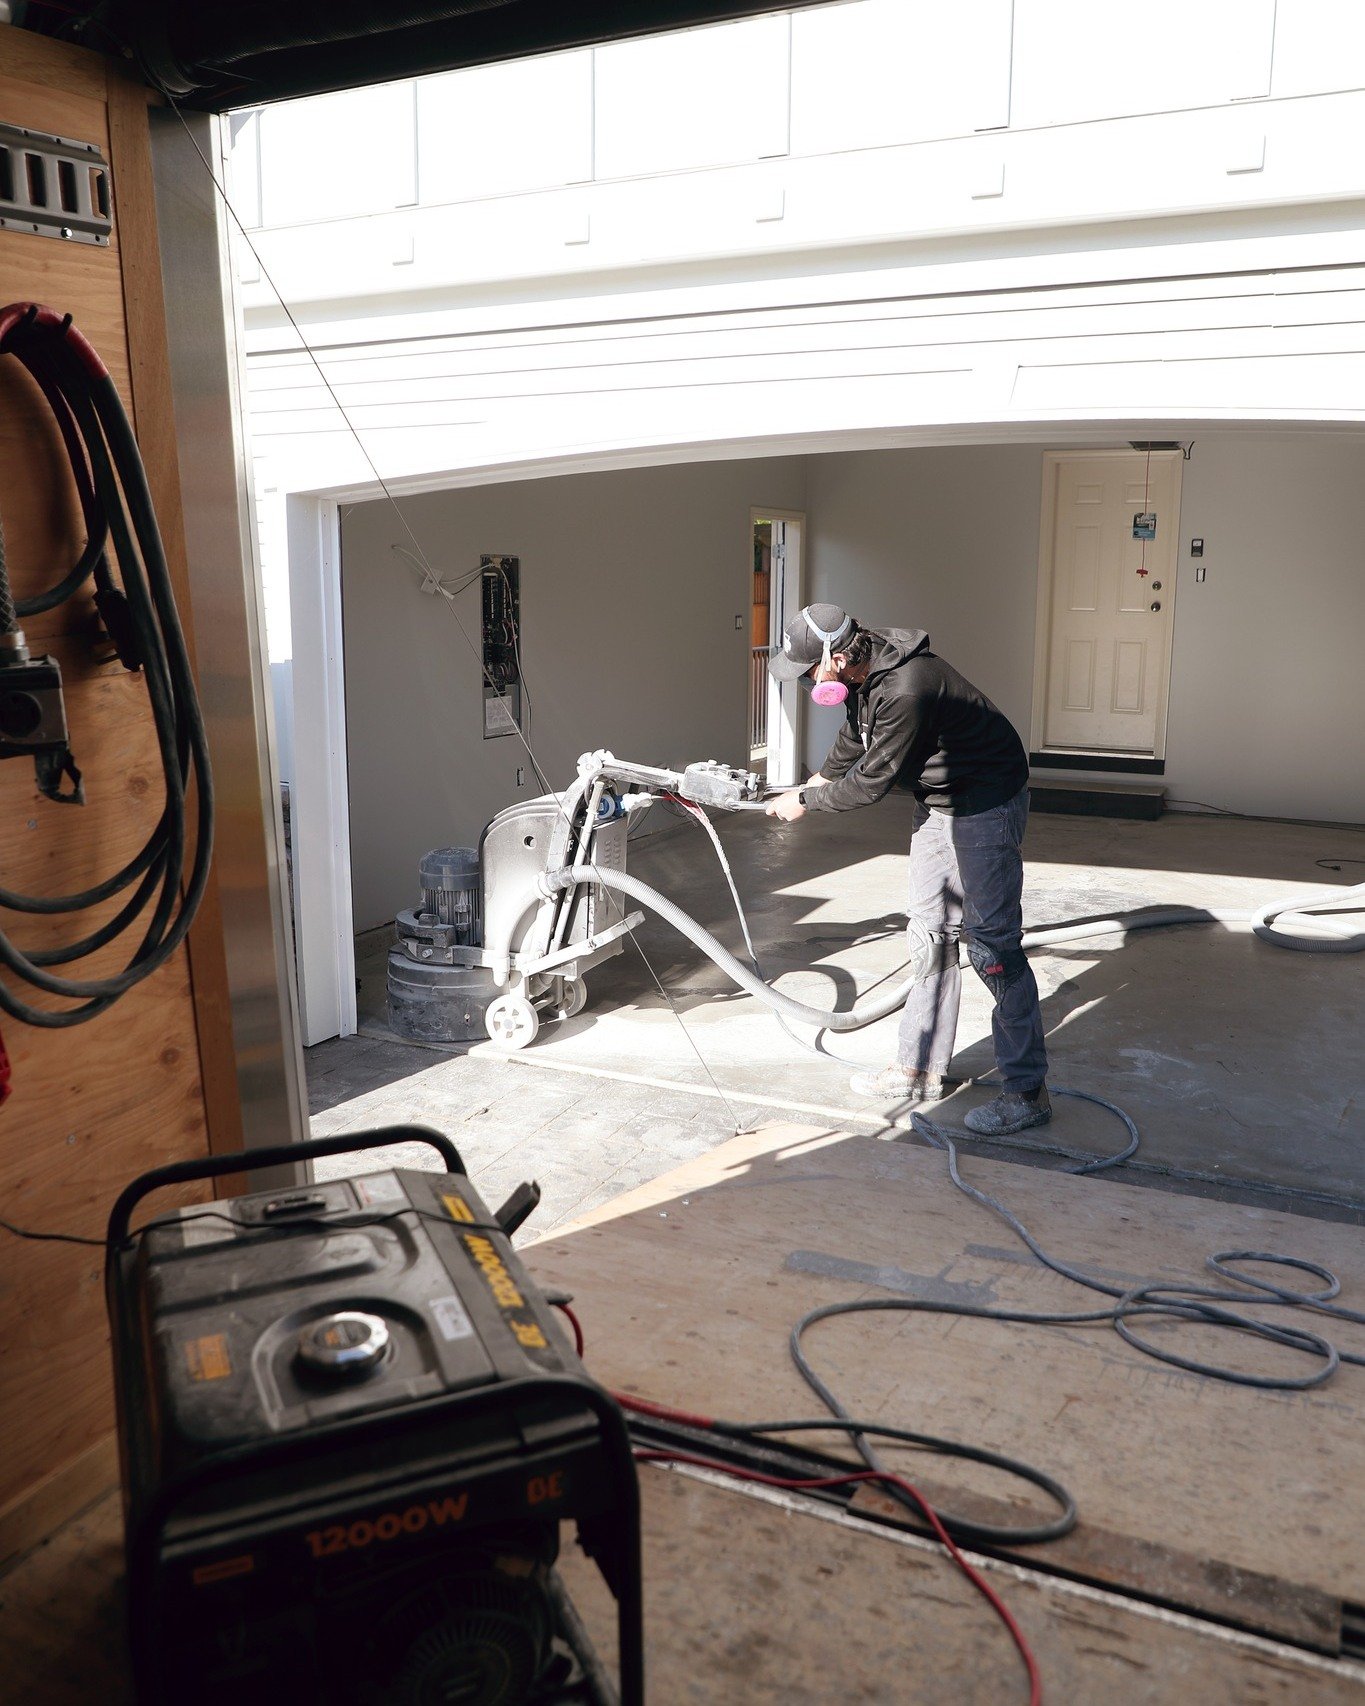 Your garage can easily be turned into another beautiful &amp; useful room for your home.
The guys @garagefloors4less can help you get your garage looking nicer and more functional than it's ever been.
Starting from the ground up, these guys will put 